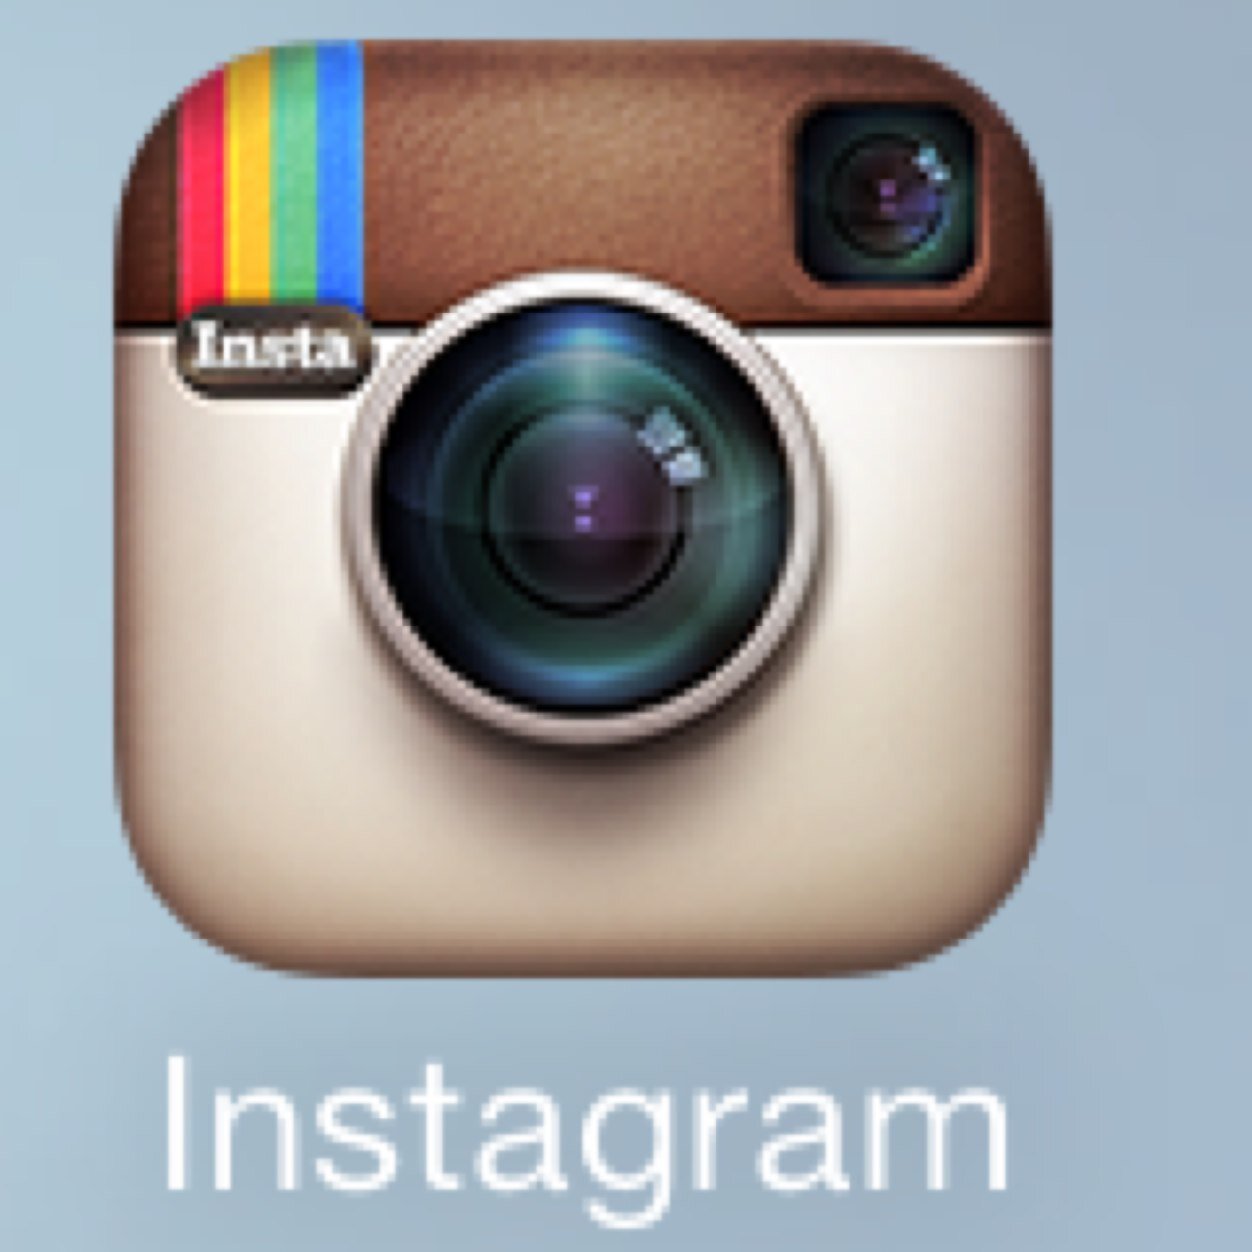 Leaked instagram pictures